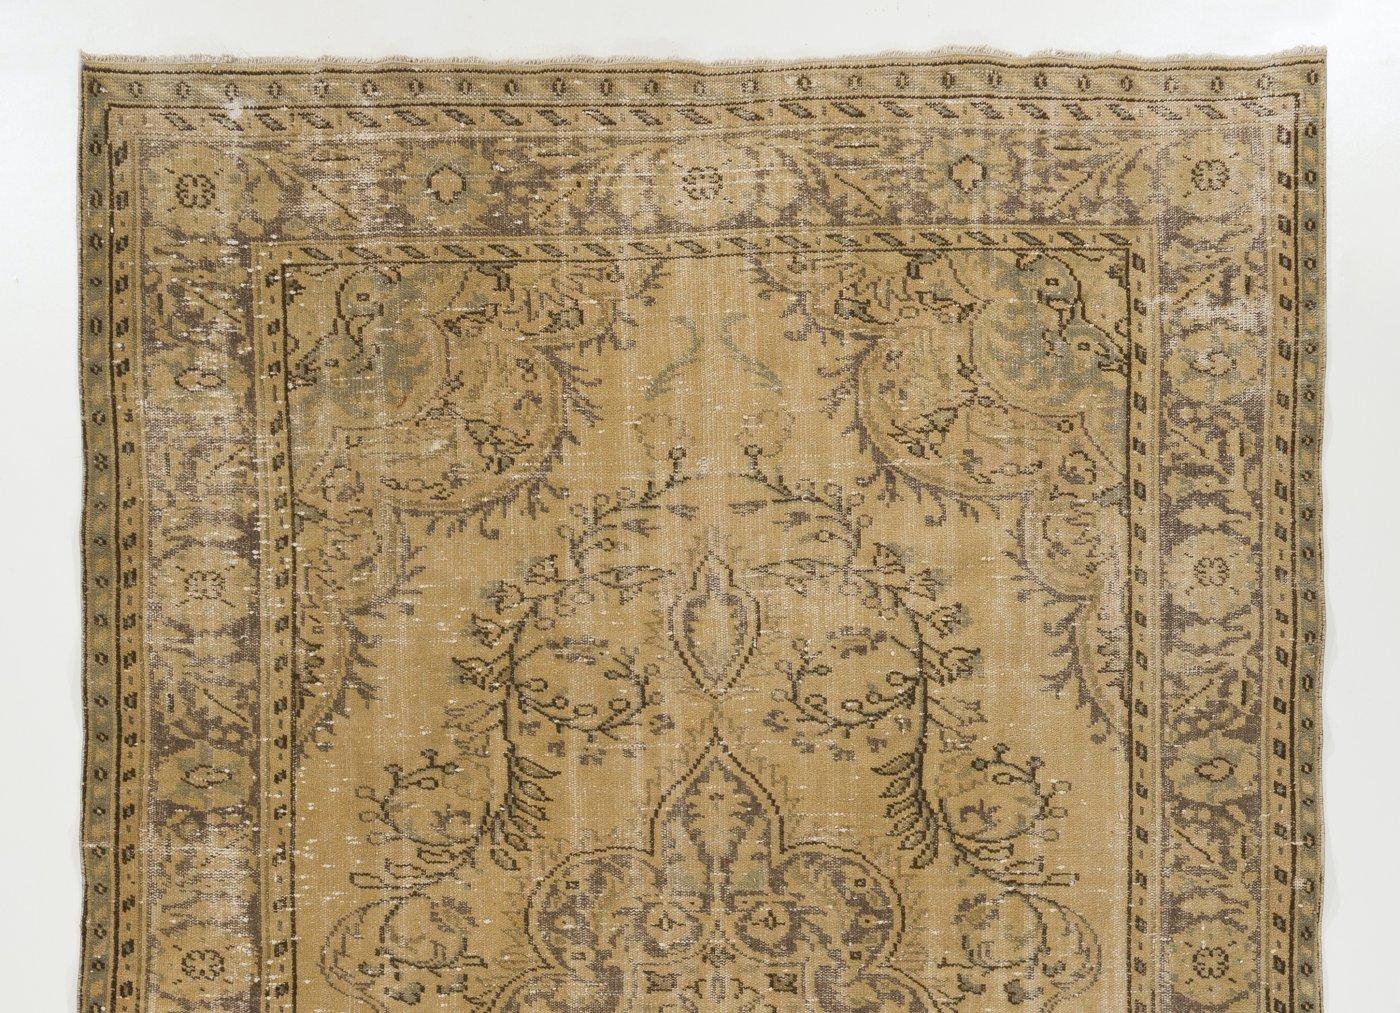 A finely hand-knotted vintage distressed Turkish carpet from 1960s featuring an elegant medallion design. The rug has even low wool pile on cotton foundation. It is heavy and lays flat on the floor, in very good condition with no issues. It has been